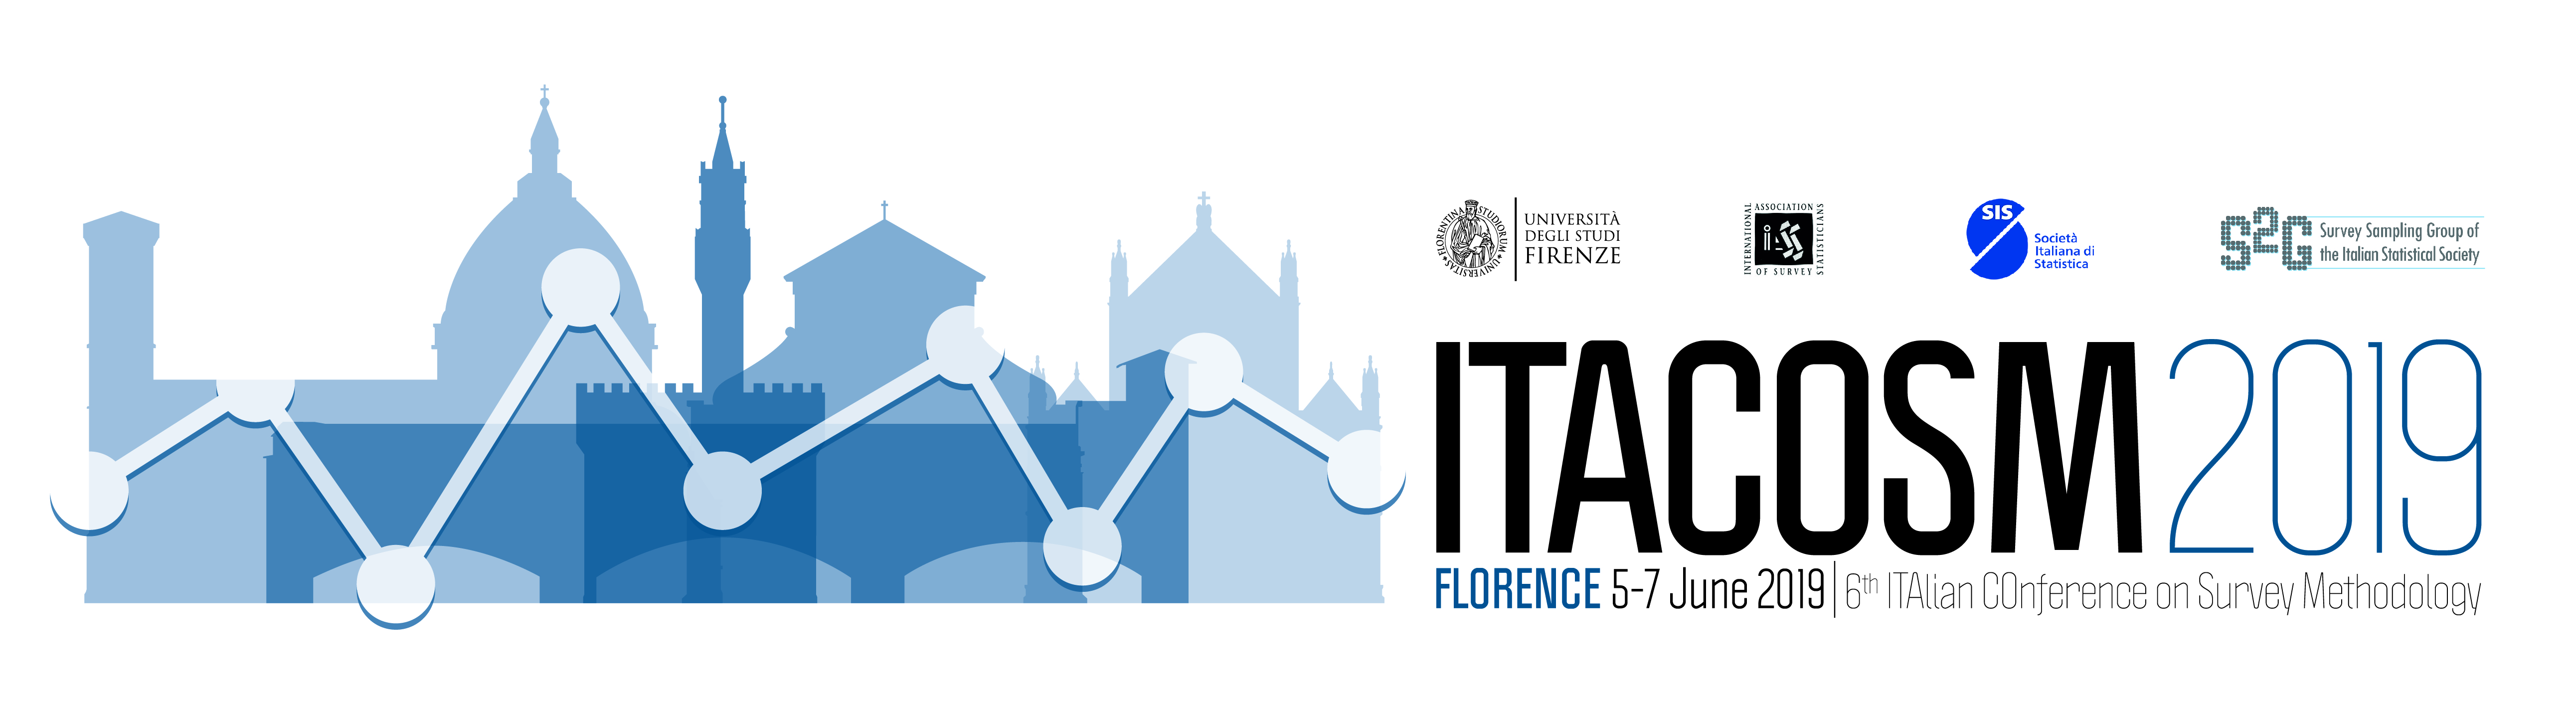 ITACOSM 2019 - Survey and Data Science